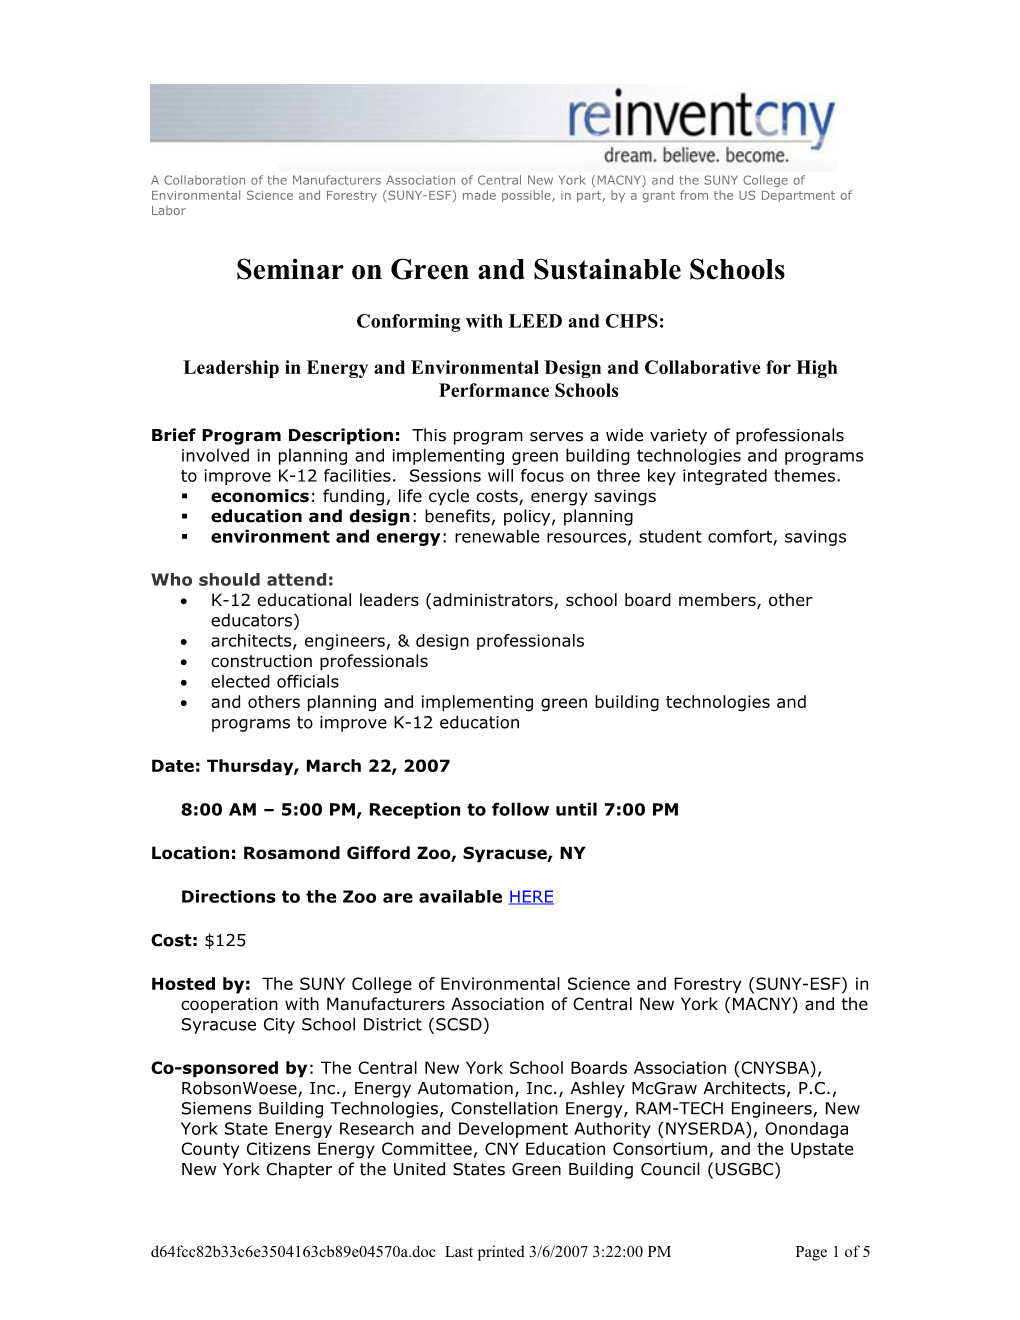 Seminar on Green and Sustainable Schools